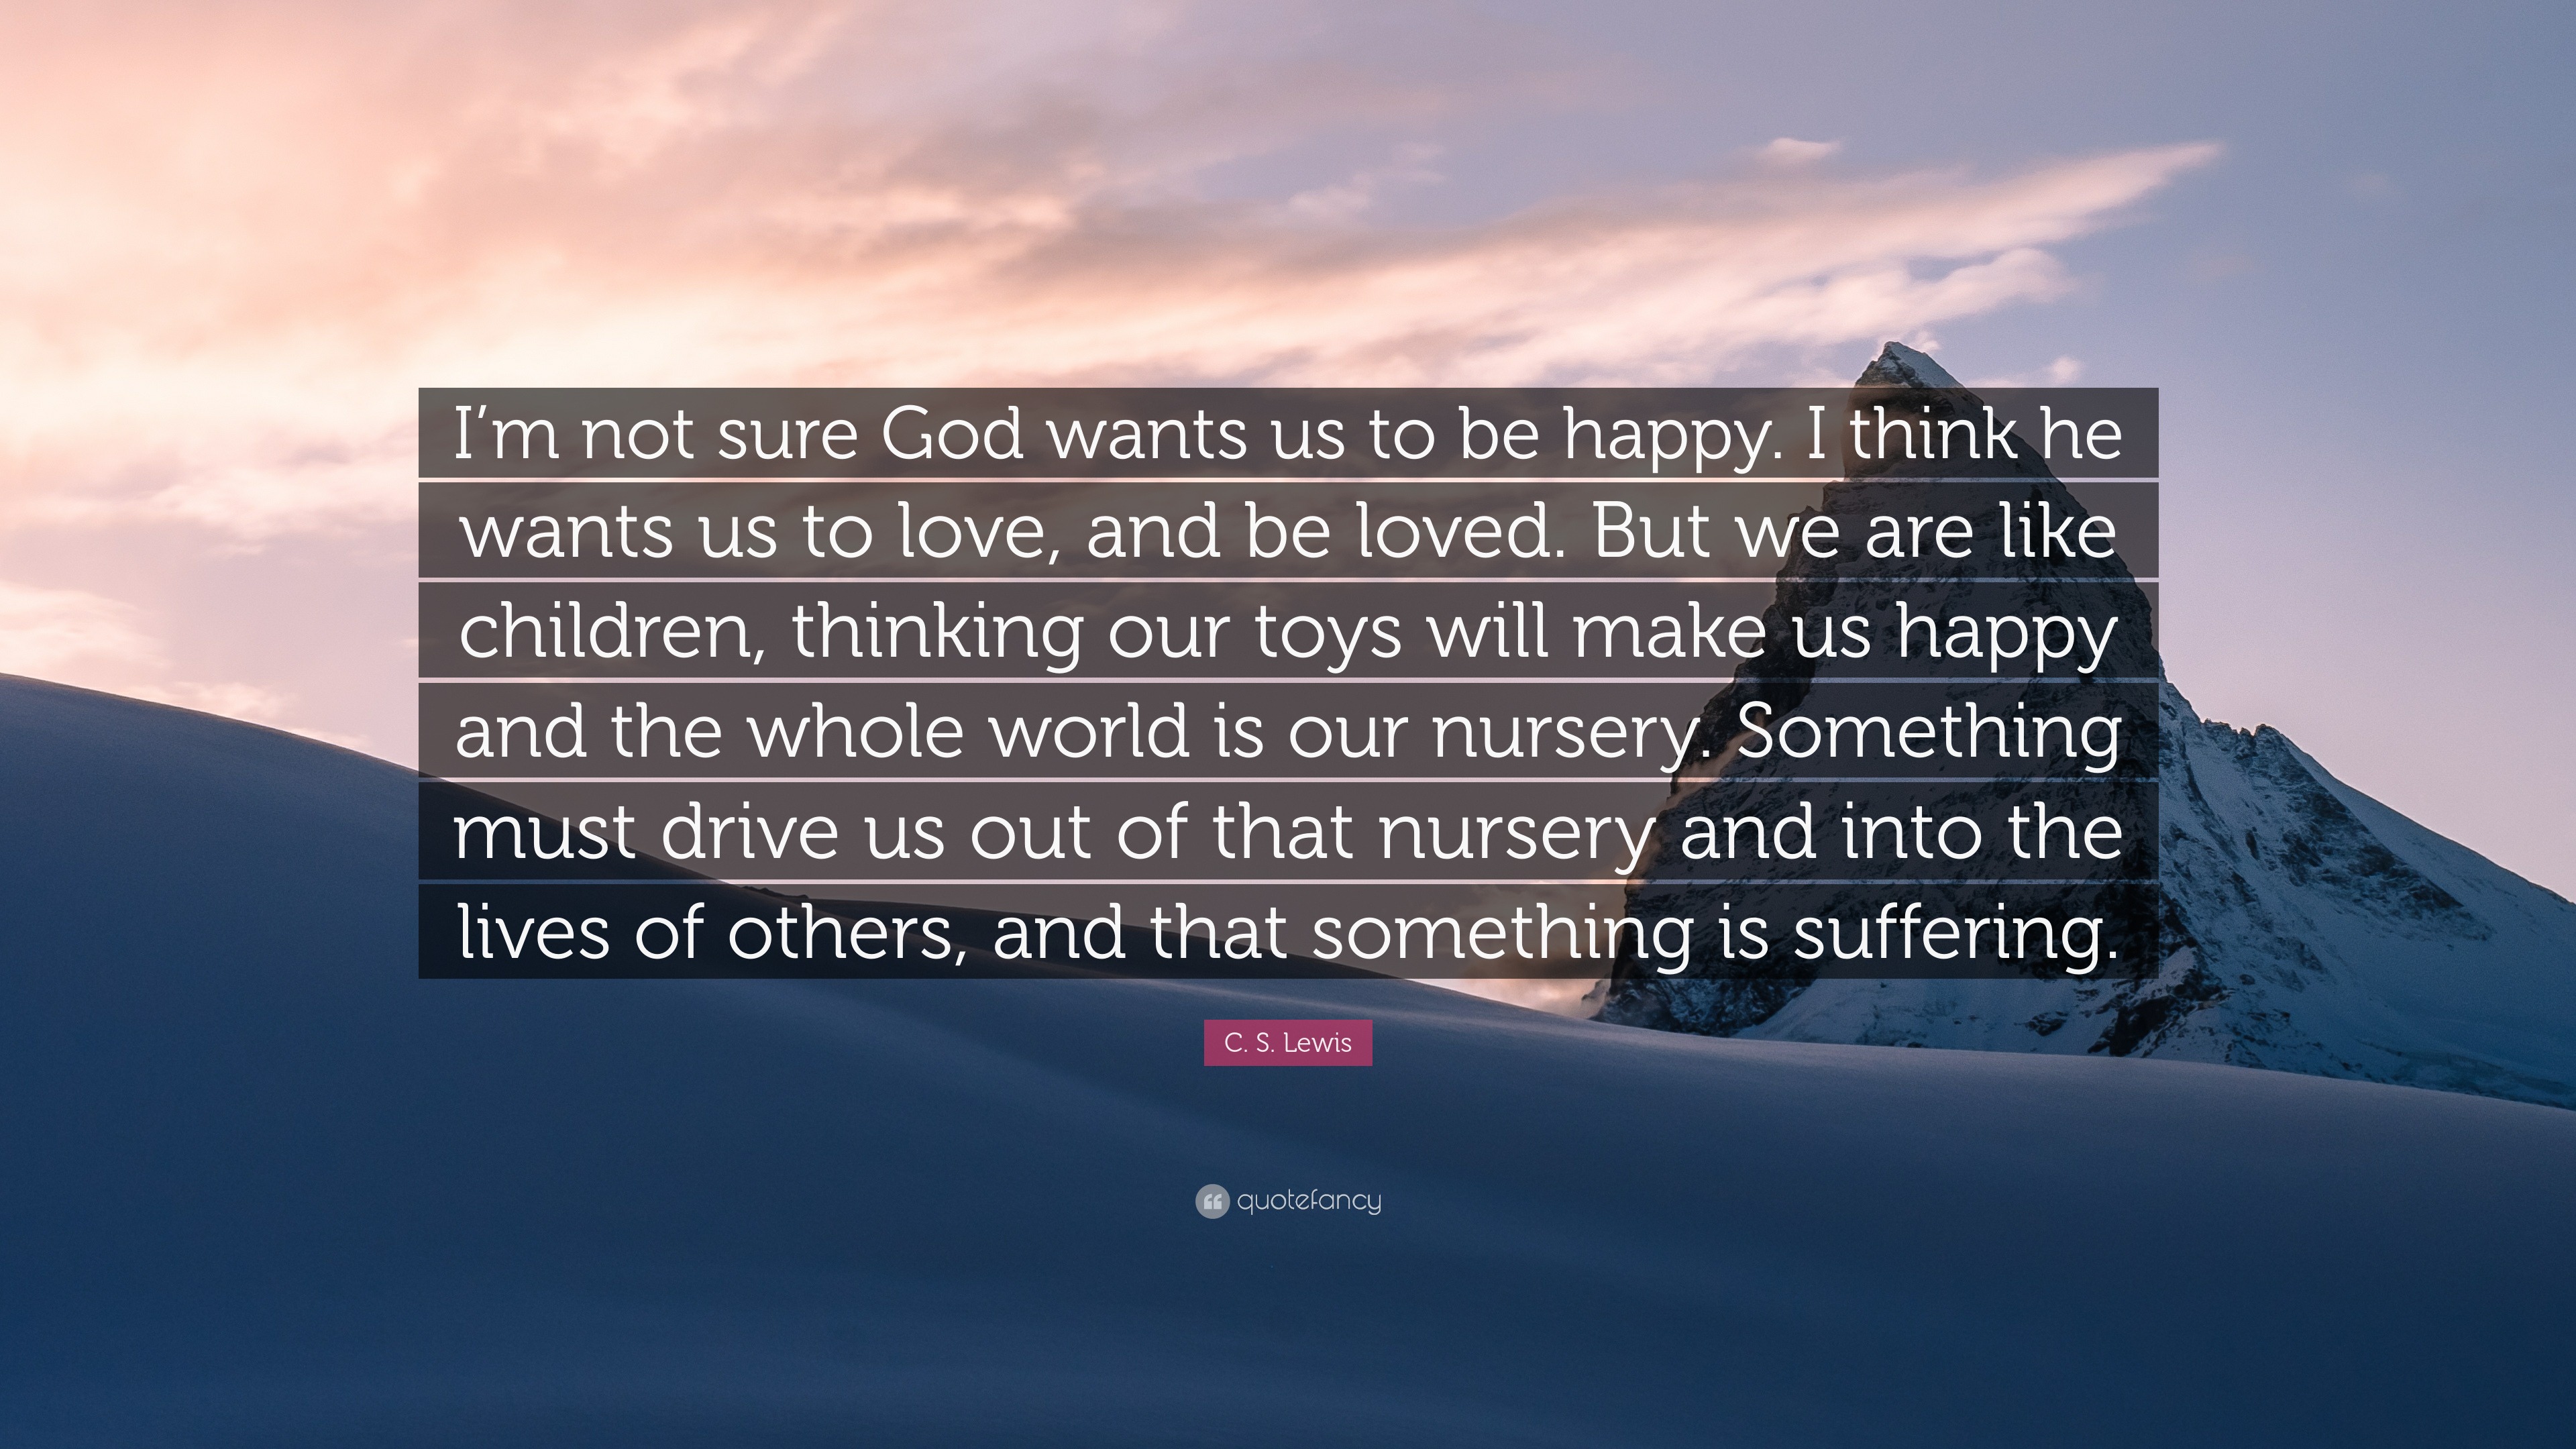 C. S. Lewis Quote: “I'm not sure God wants us to think he wants us to love, be loved. But we are like children, thinking our...”